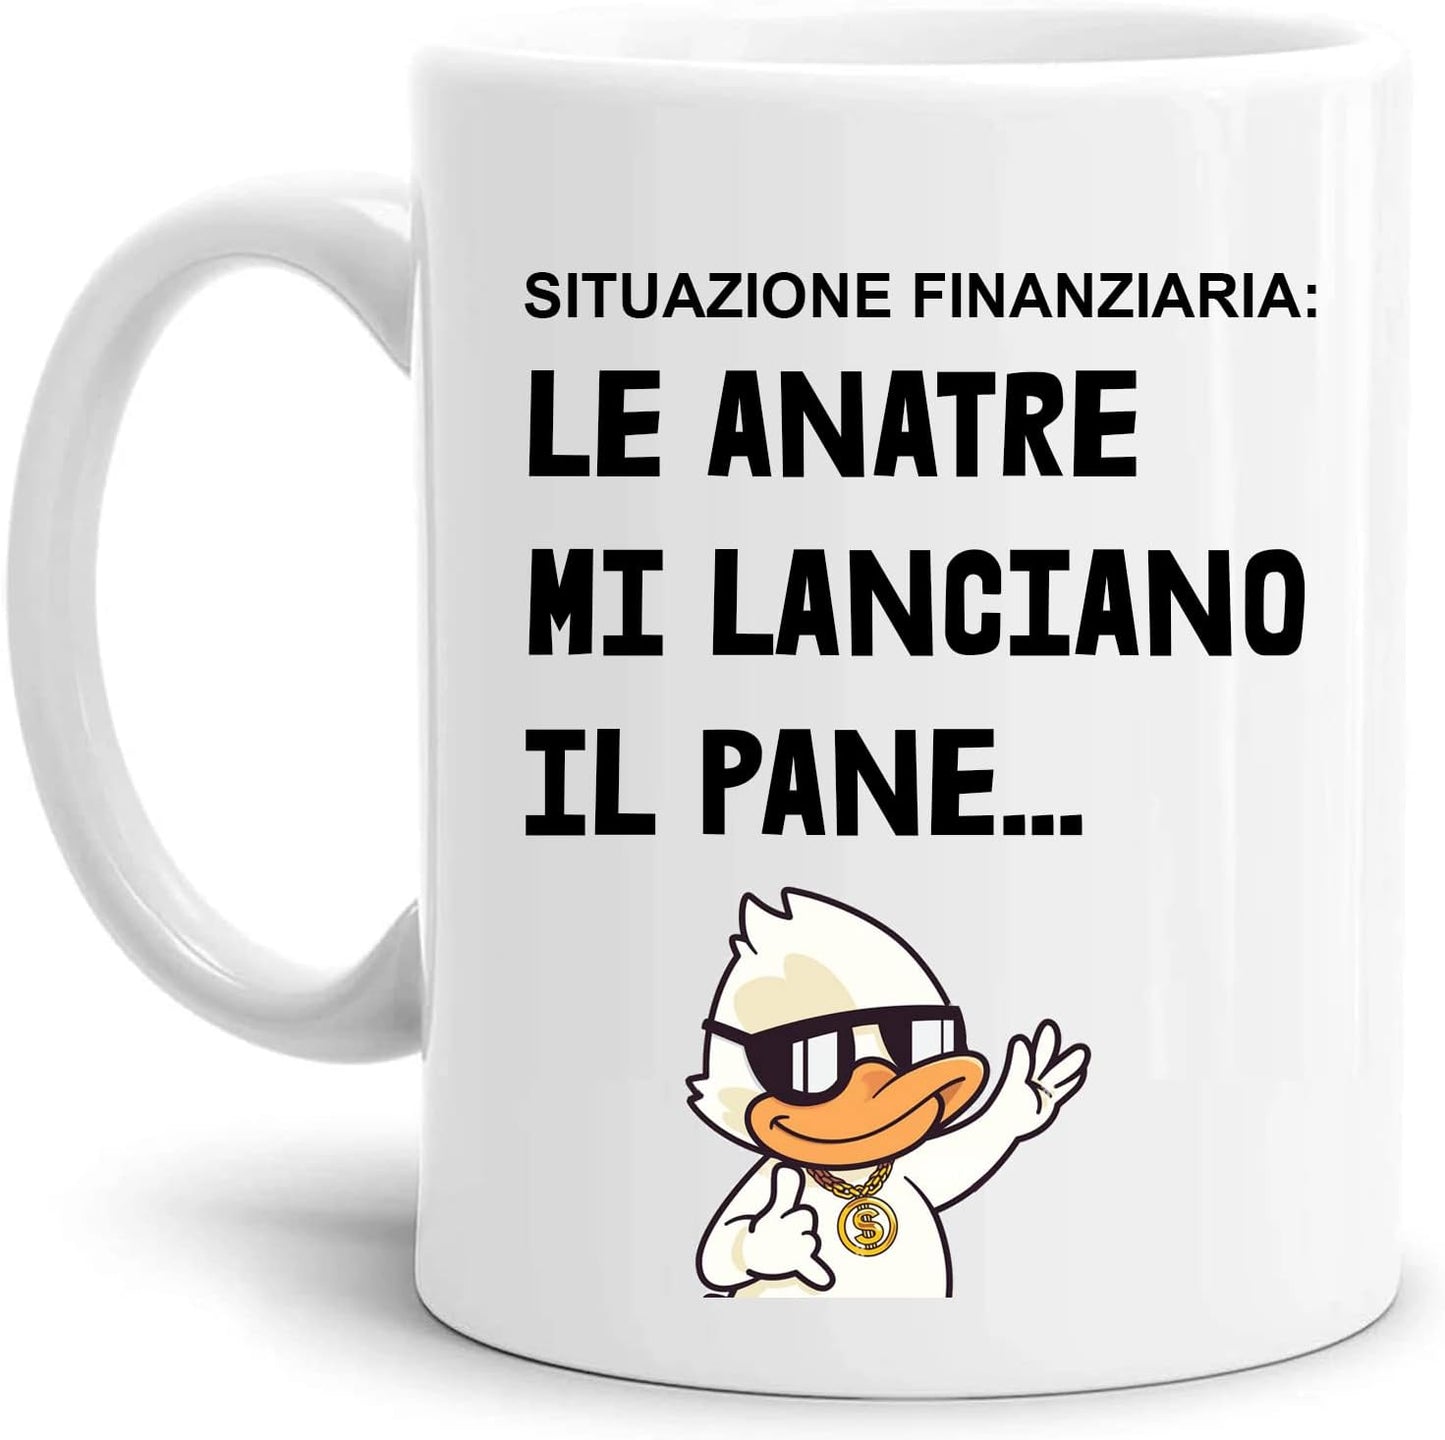 Mug - financial situation the ducks throw the bread at me funny nice gift mum dad colleagues friends ceramic for breakfast coffee or tea